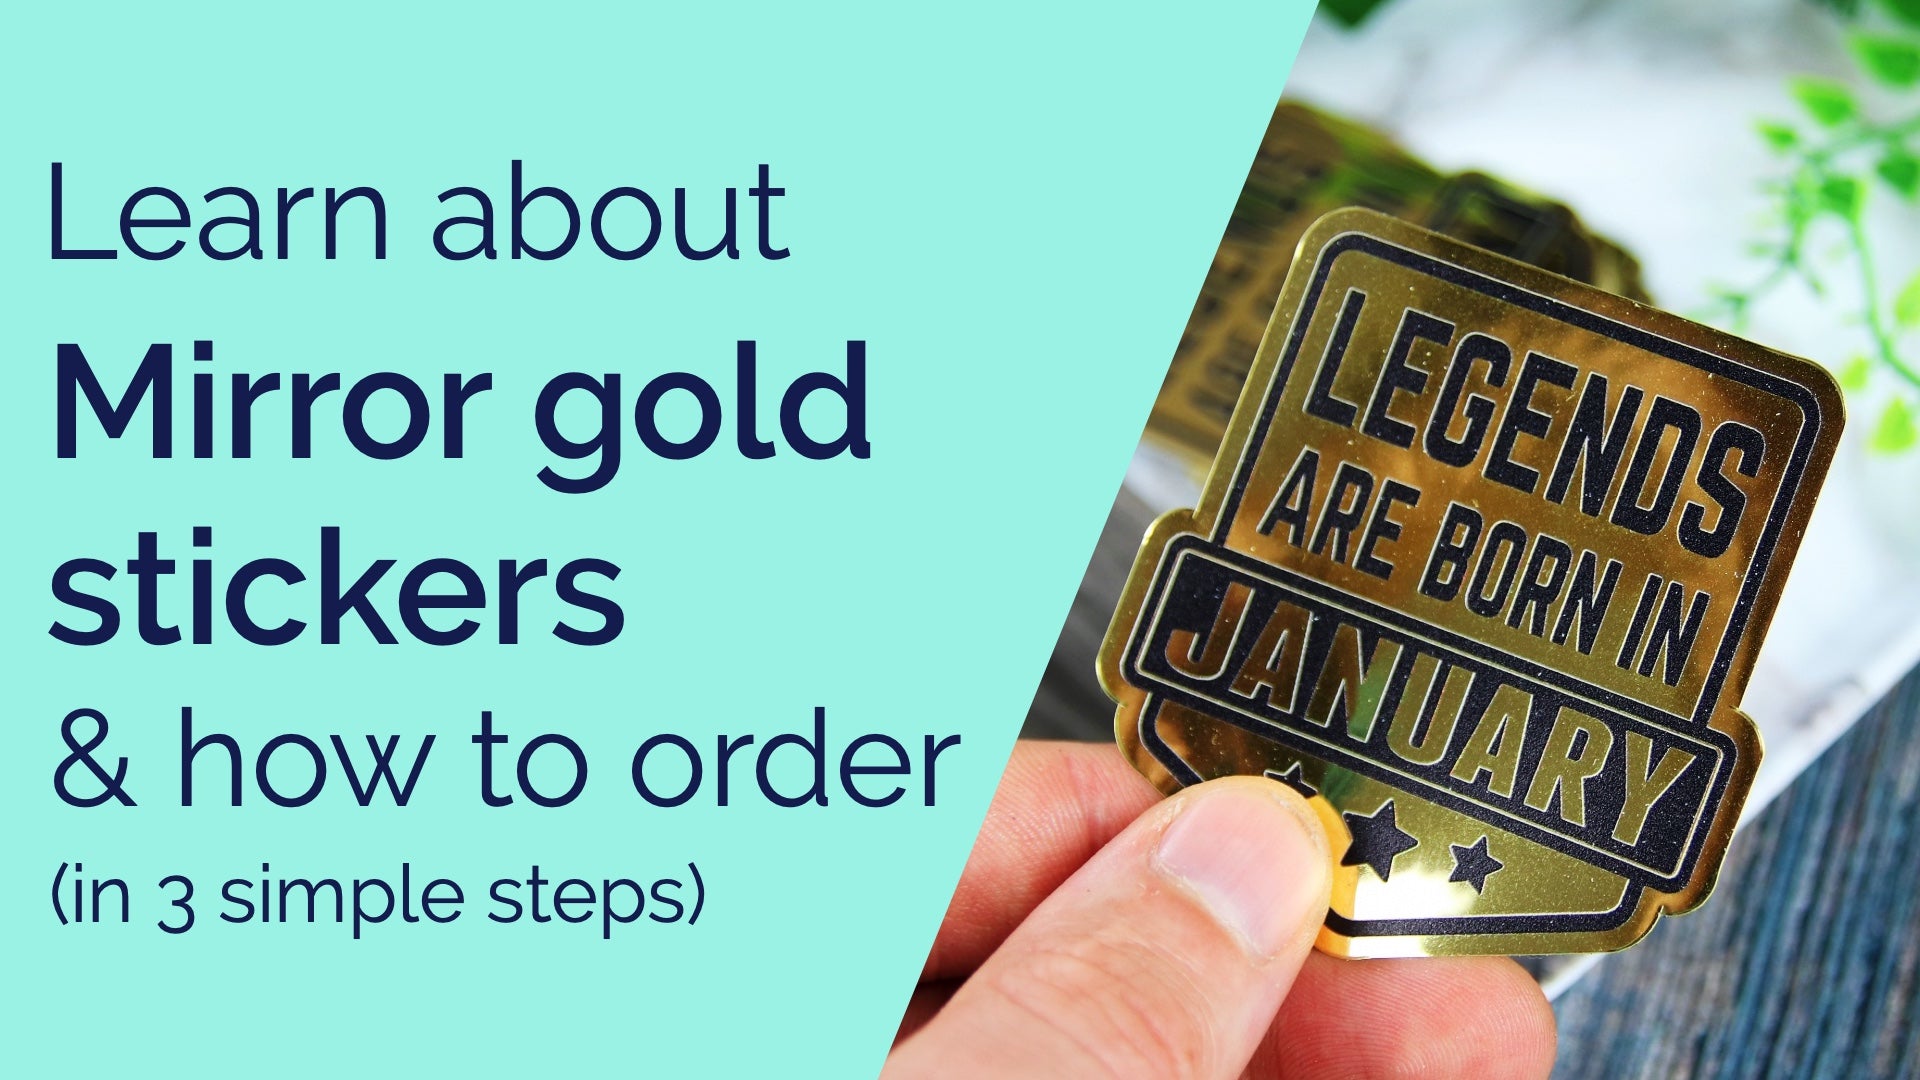 Load video: A video explaining what mirror gold stickers are and how to order them